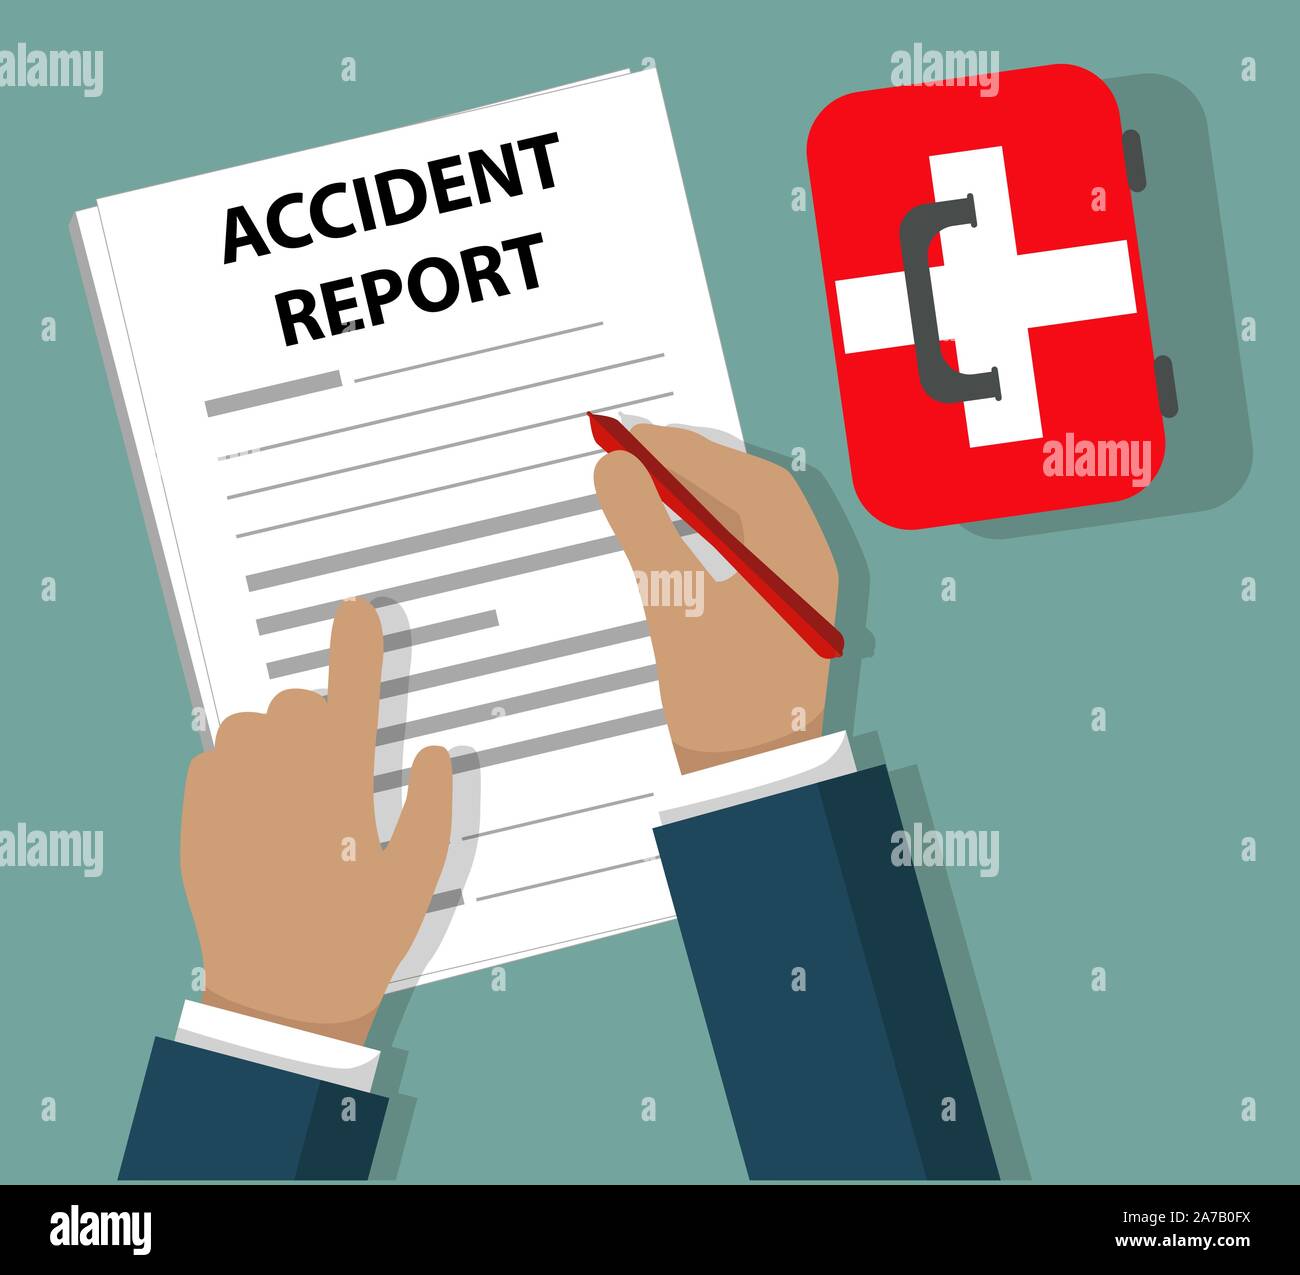 Businessman Completing Accident Report document beside First Aid Kit - Health and Safety concept - vector grouped and easy to edit Stock Vector